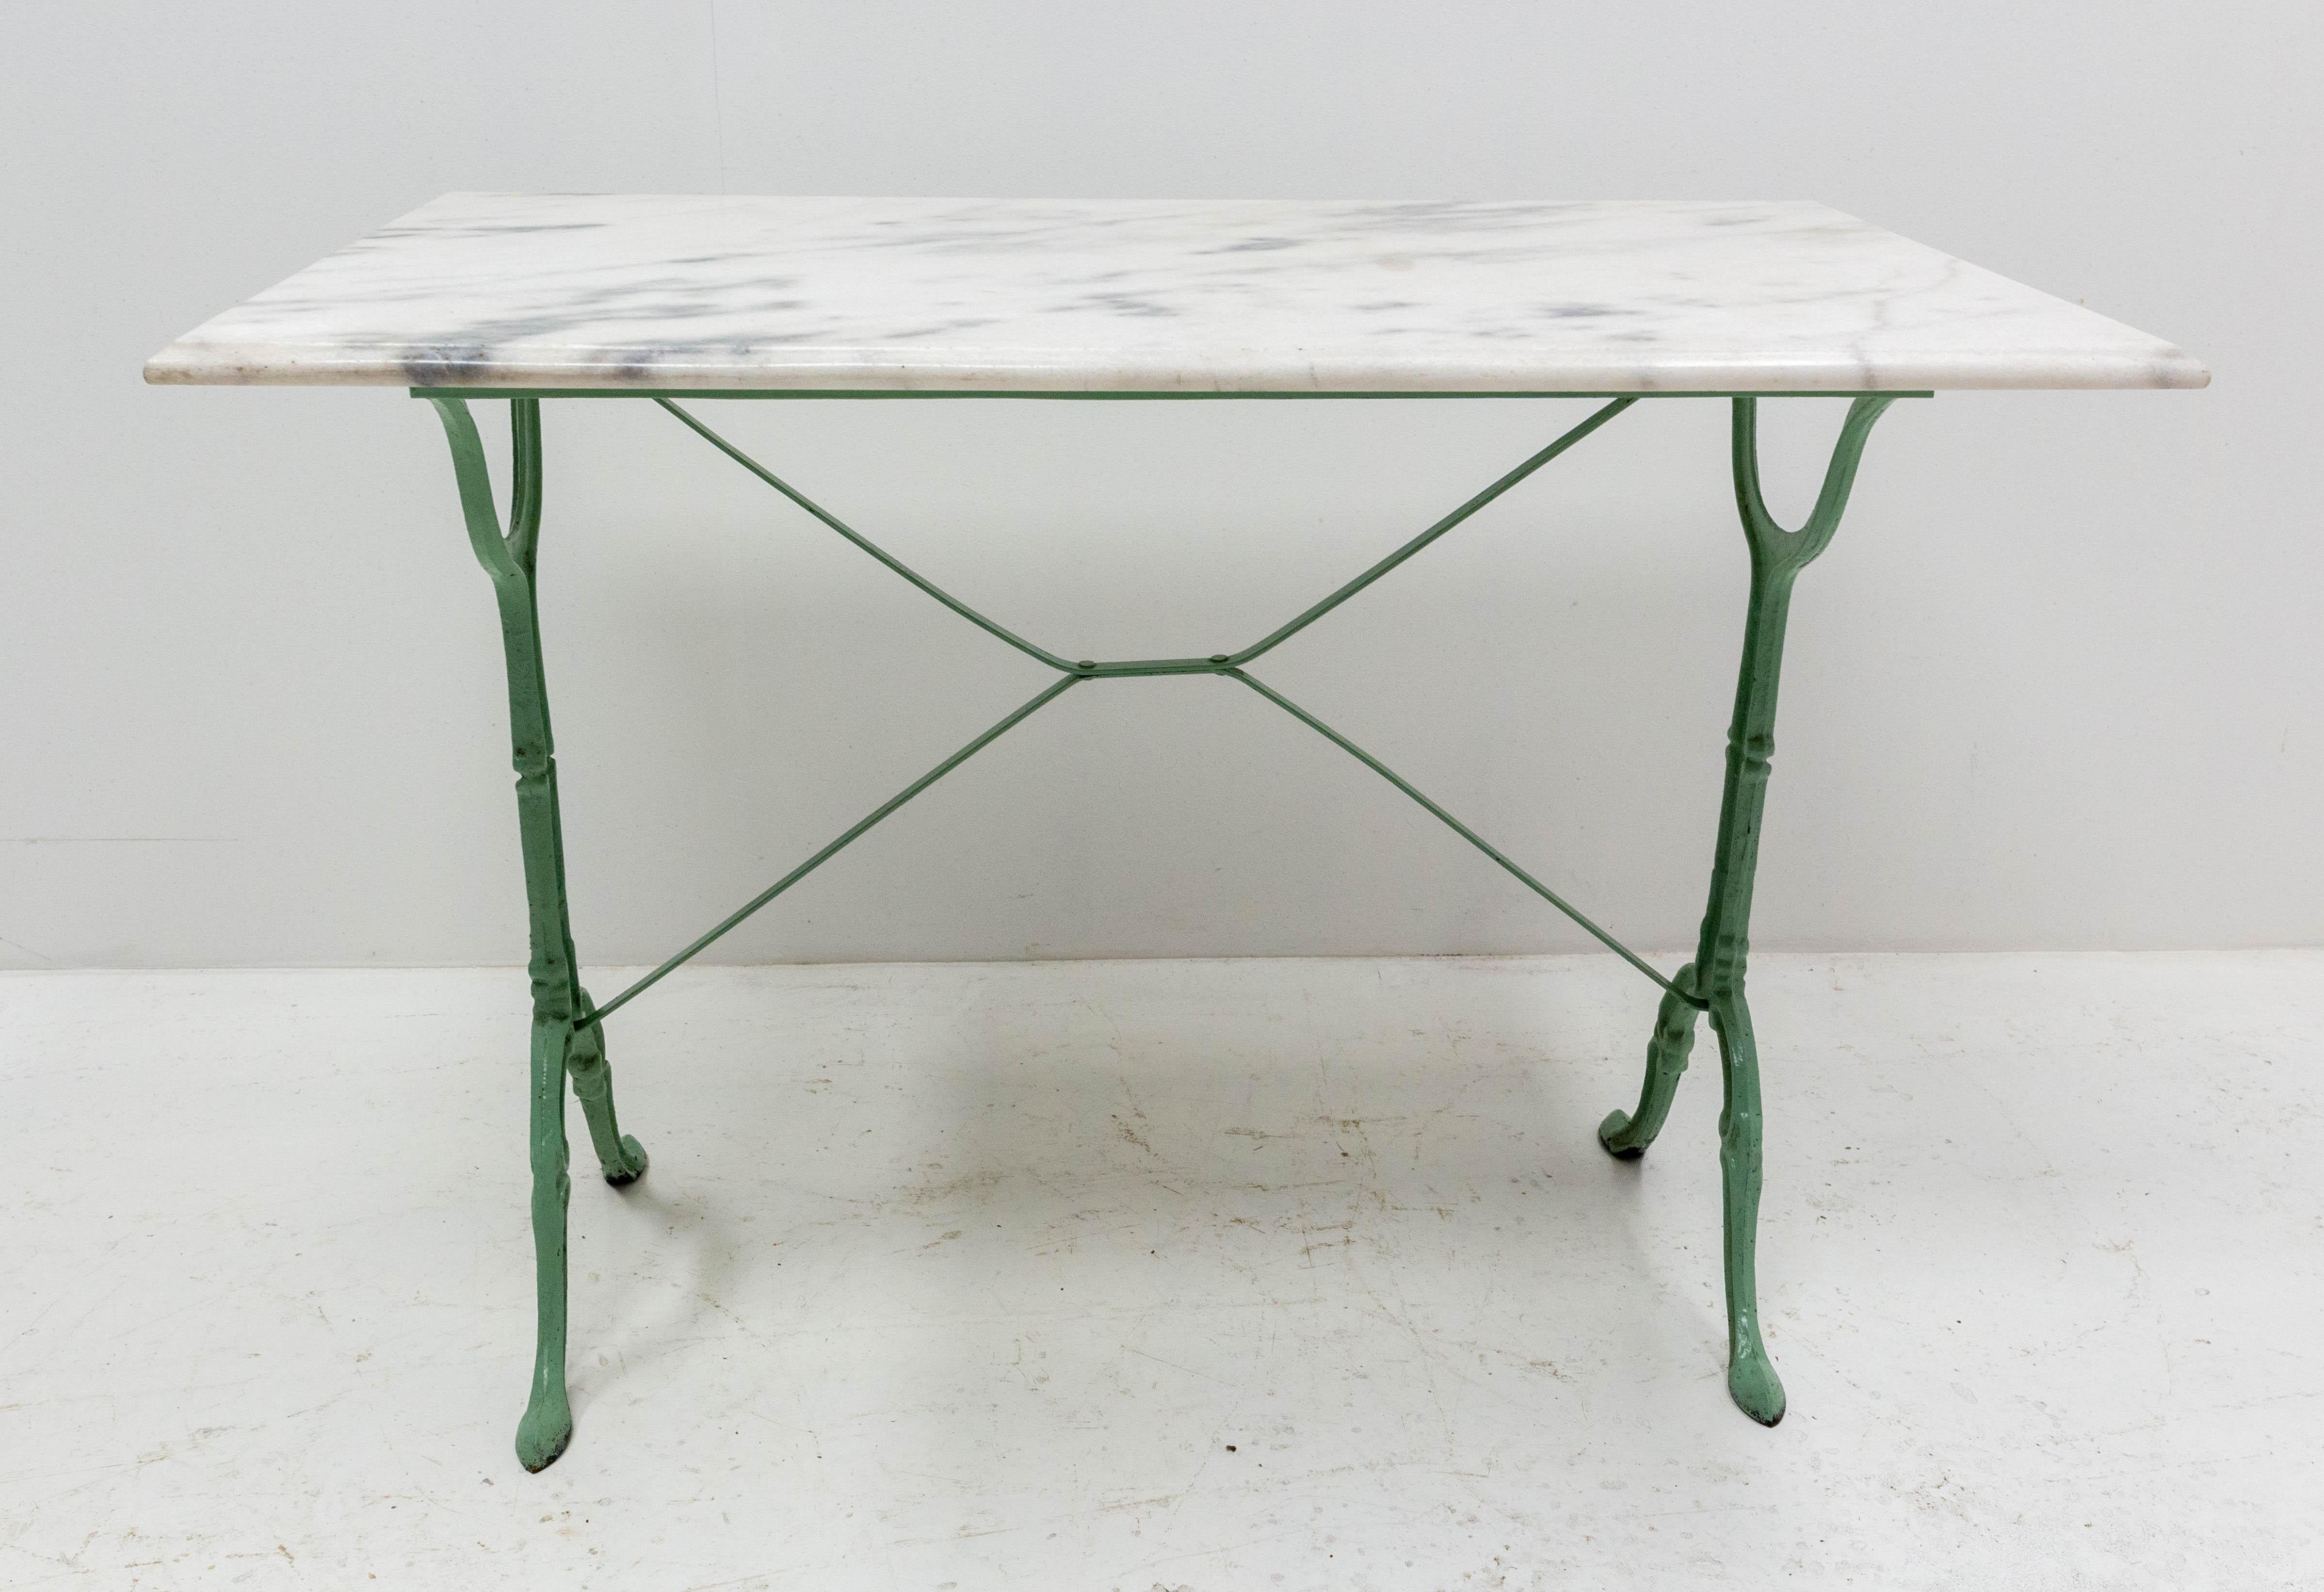 Bistro table with marble top and cast iron legs,
French, mid-century
Delivered disassembled
Good antique condition with general signs of use to the metal base and on the marble top.
 
wooden case: 109,00 23,00 69 cm 58 kg.